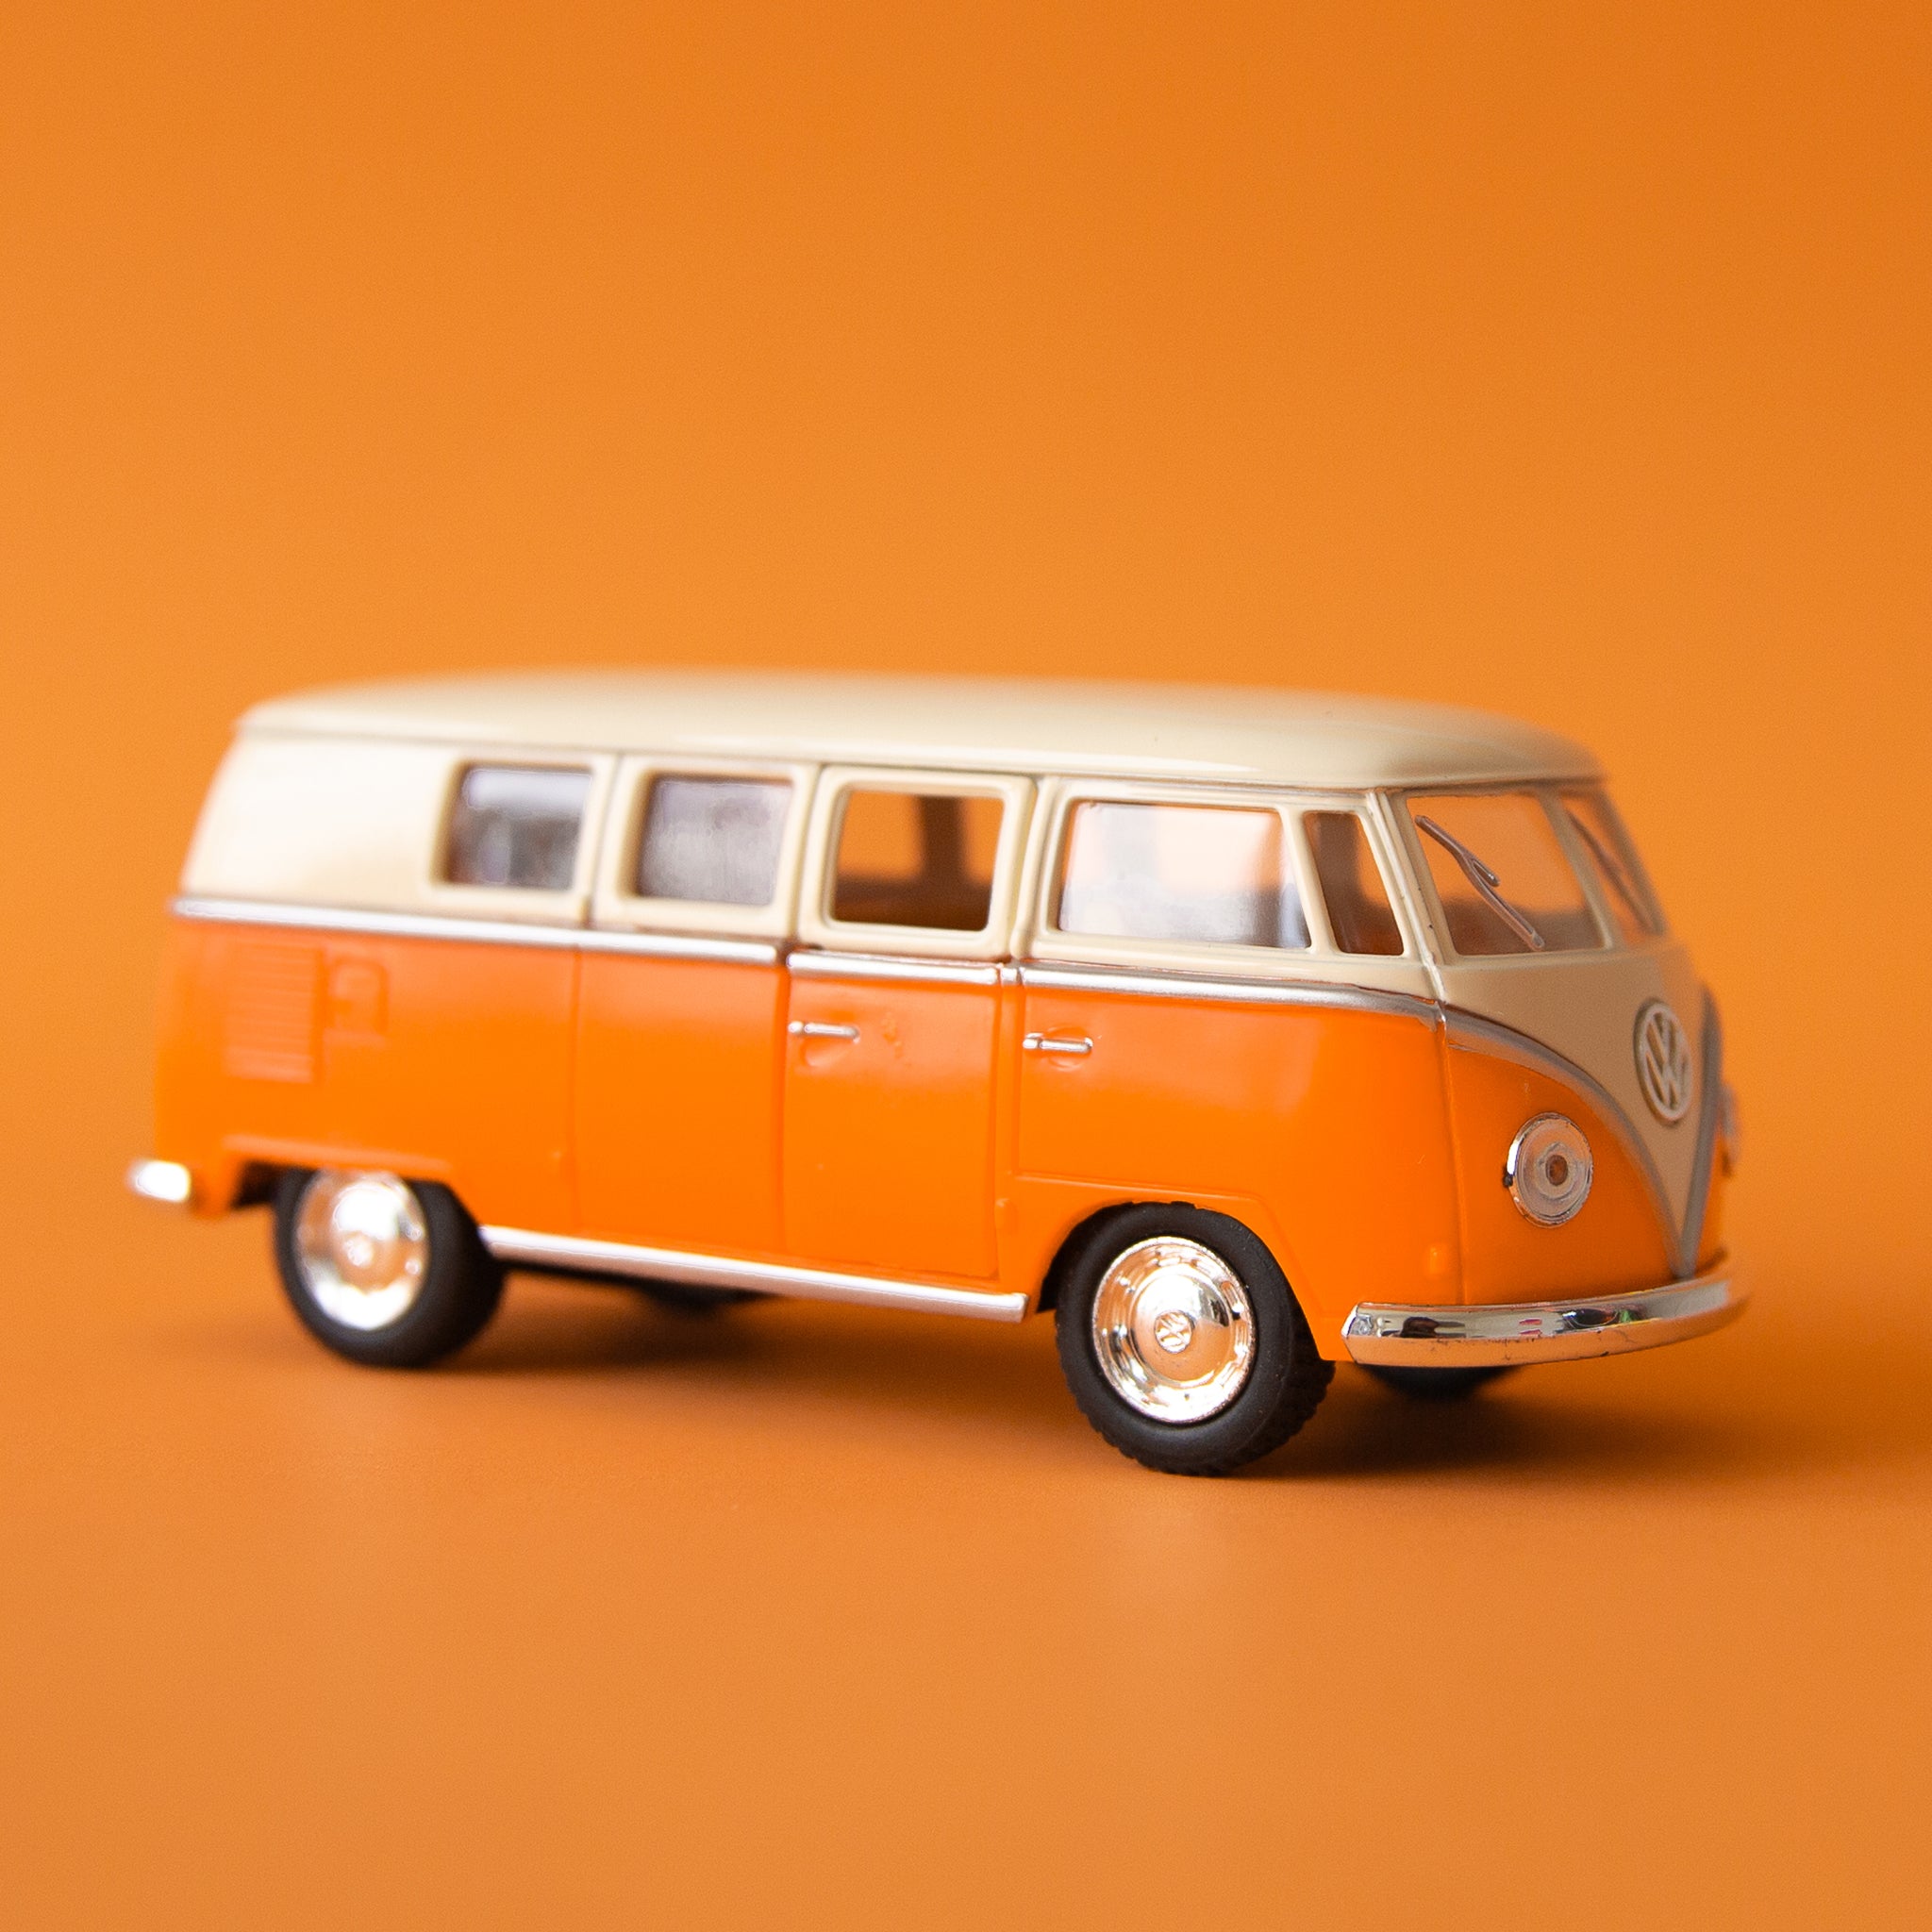 On an orange background is an orange and white VW bus toy